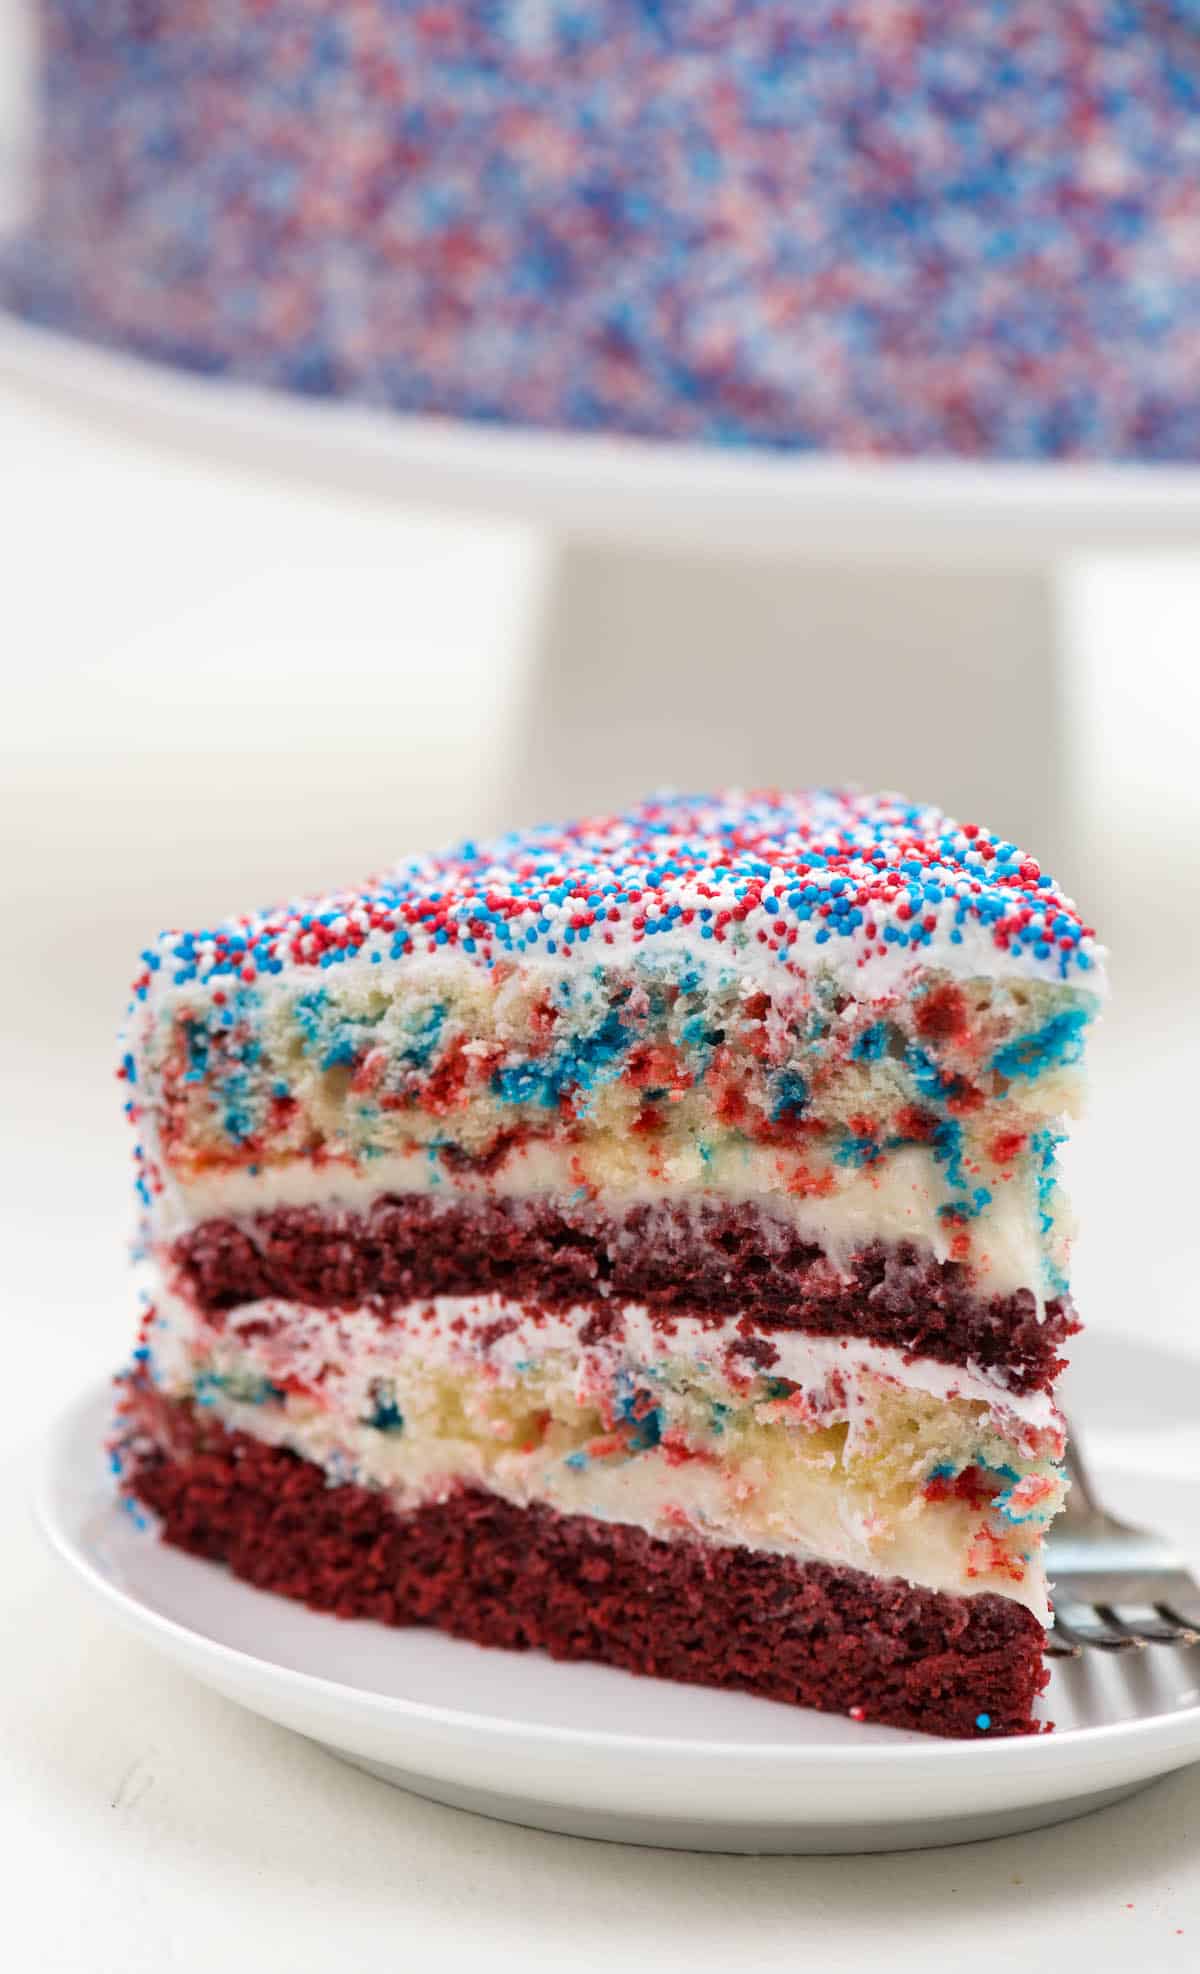 yellow and red layered cake covered in patriotic sprinkles on a white plate.